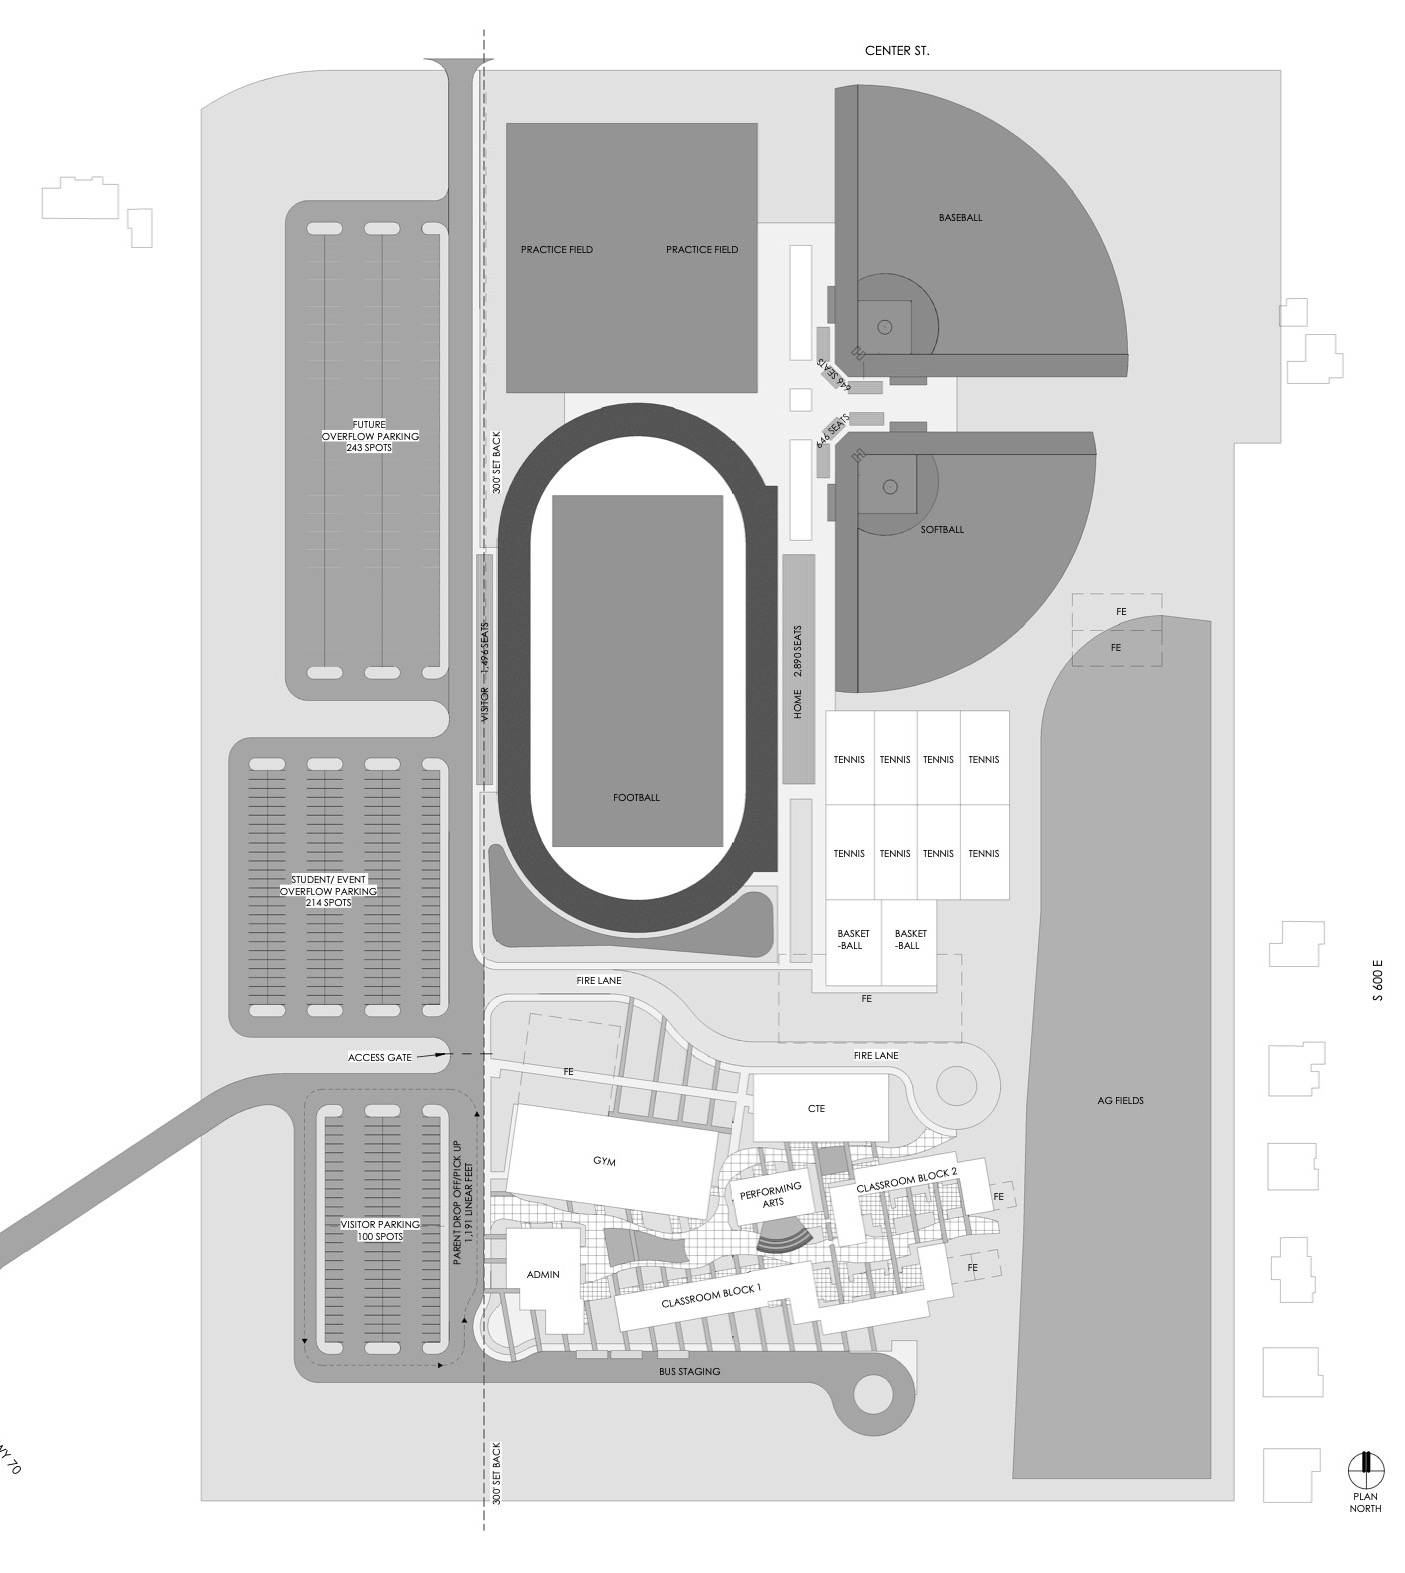 Graphic depiction of the complete site plan for the new Pima High School campus.